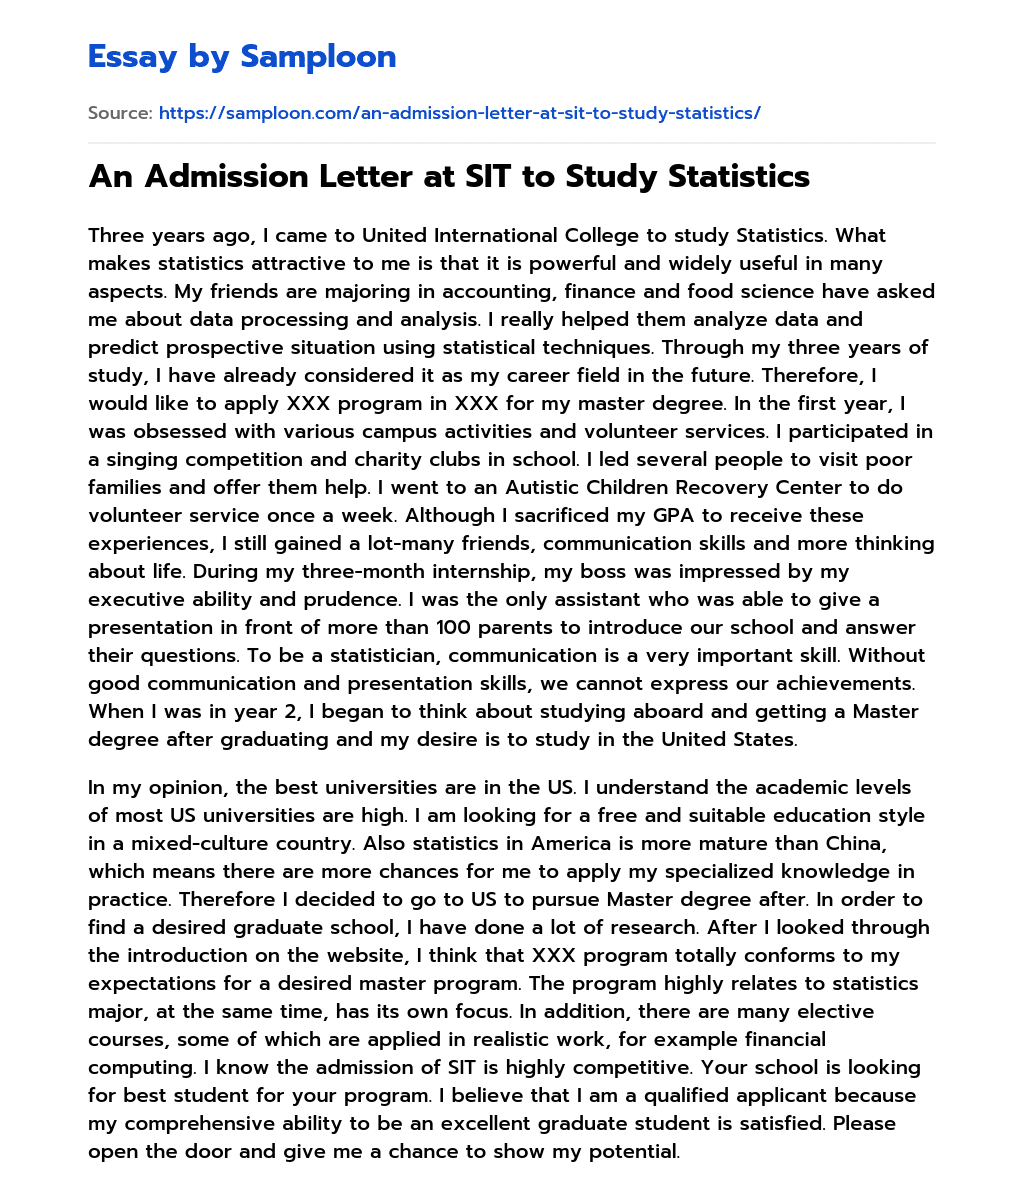 An Admission Letter at SIT to Study Statistics essay